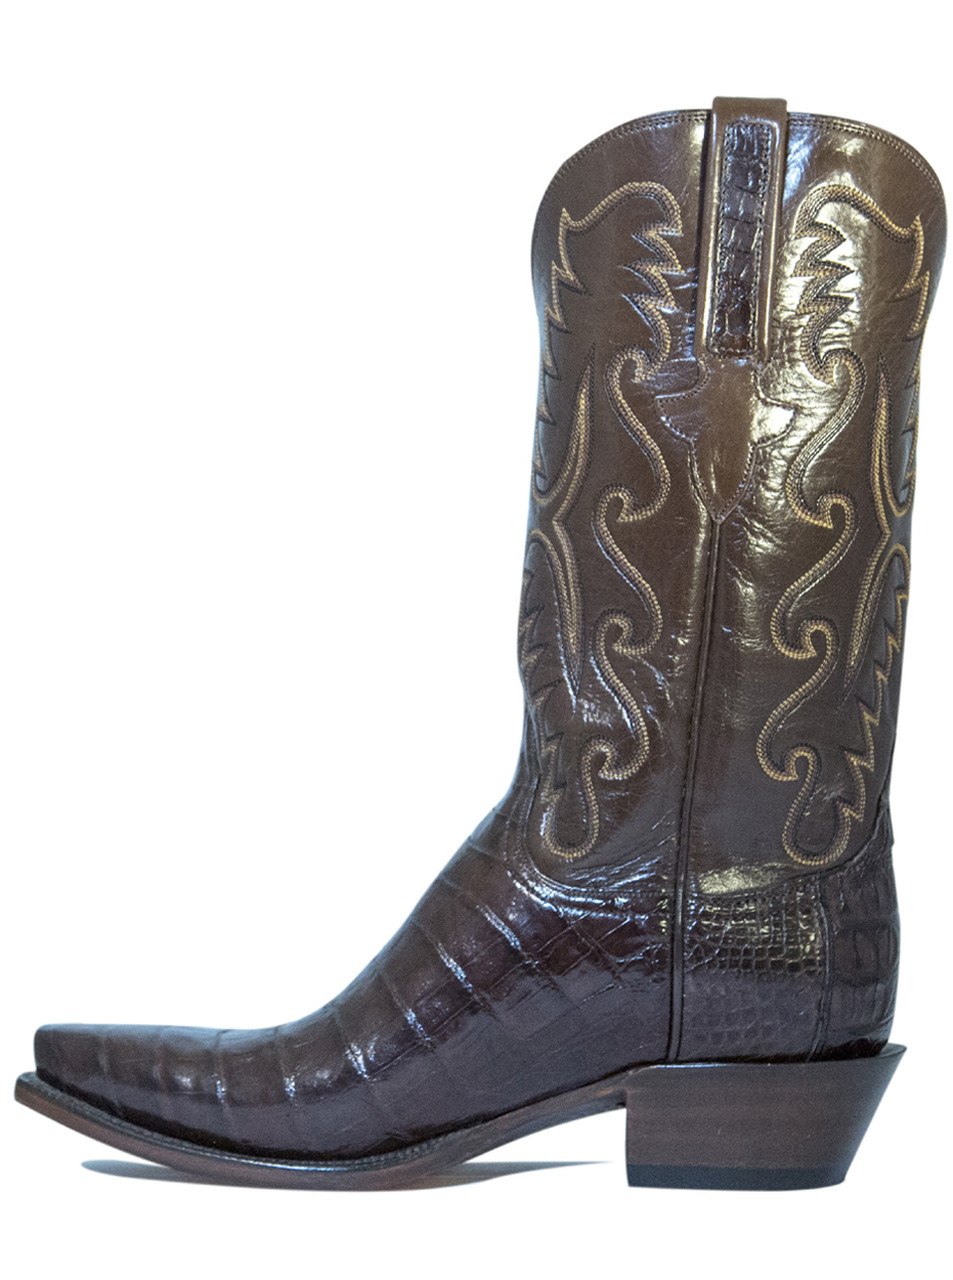 lucchese ultra caiman belly boots